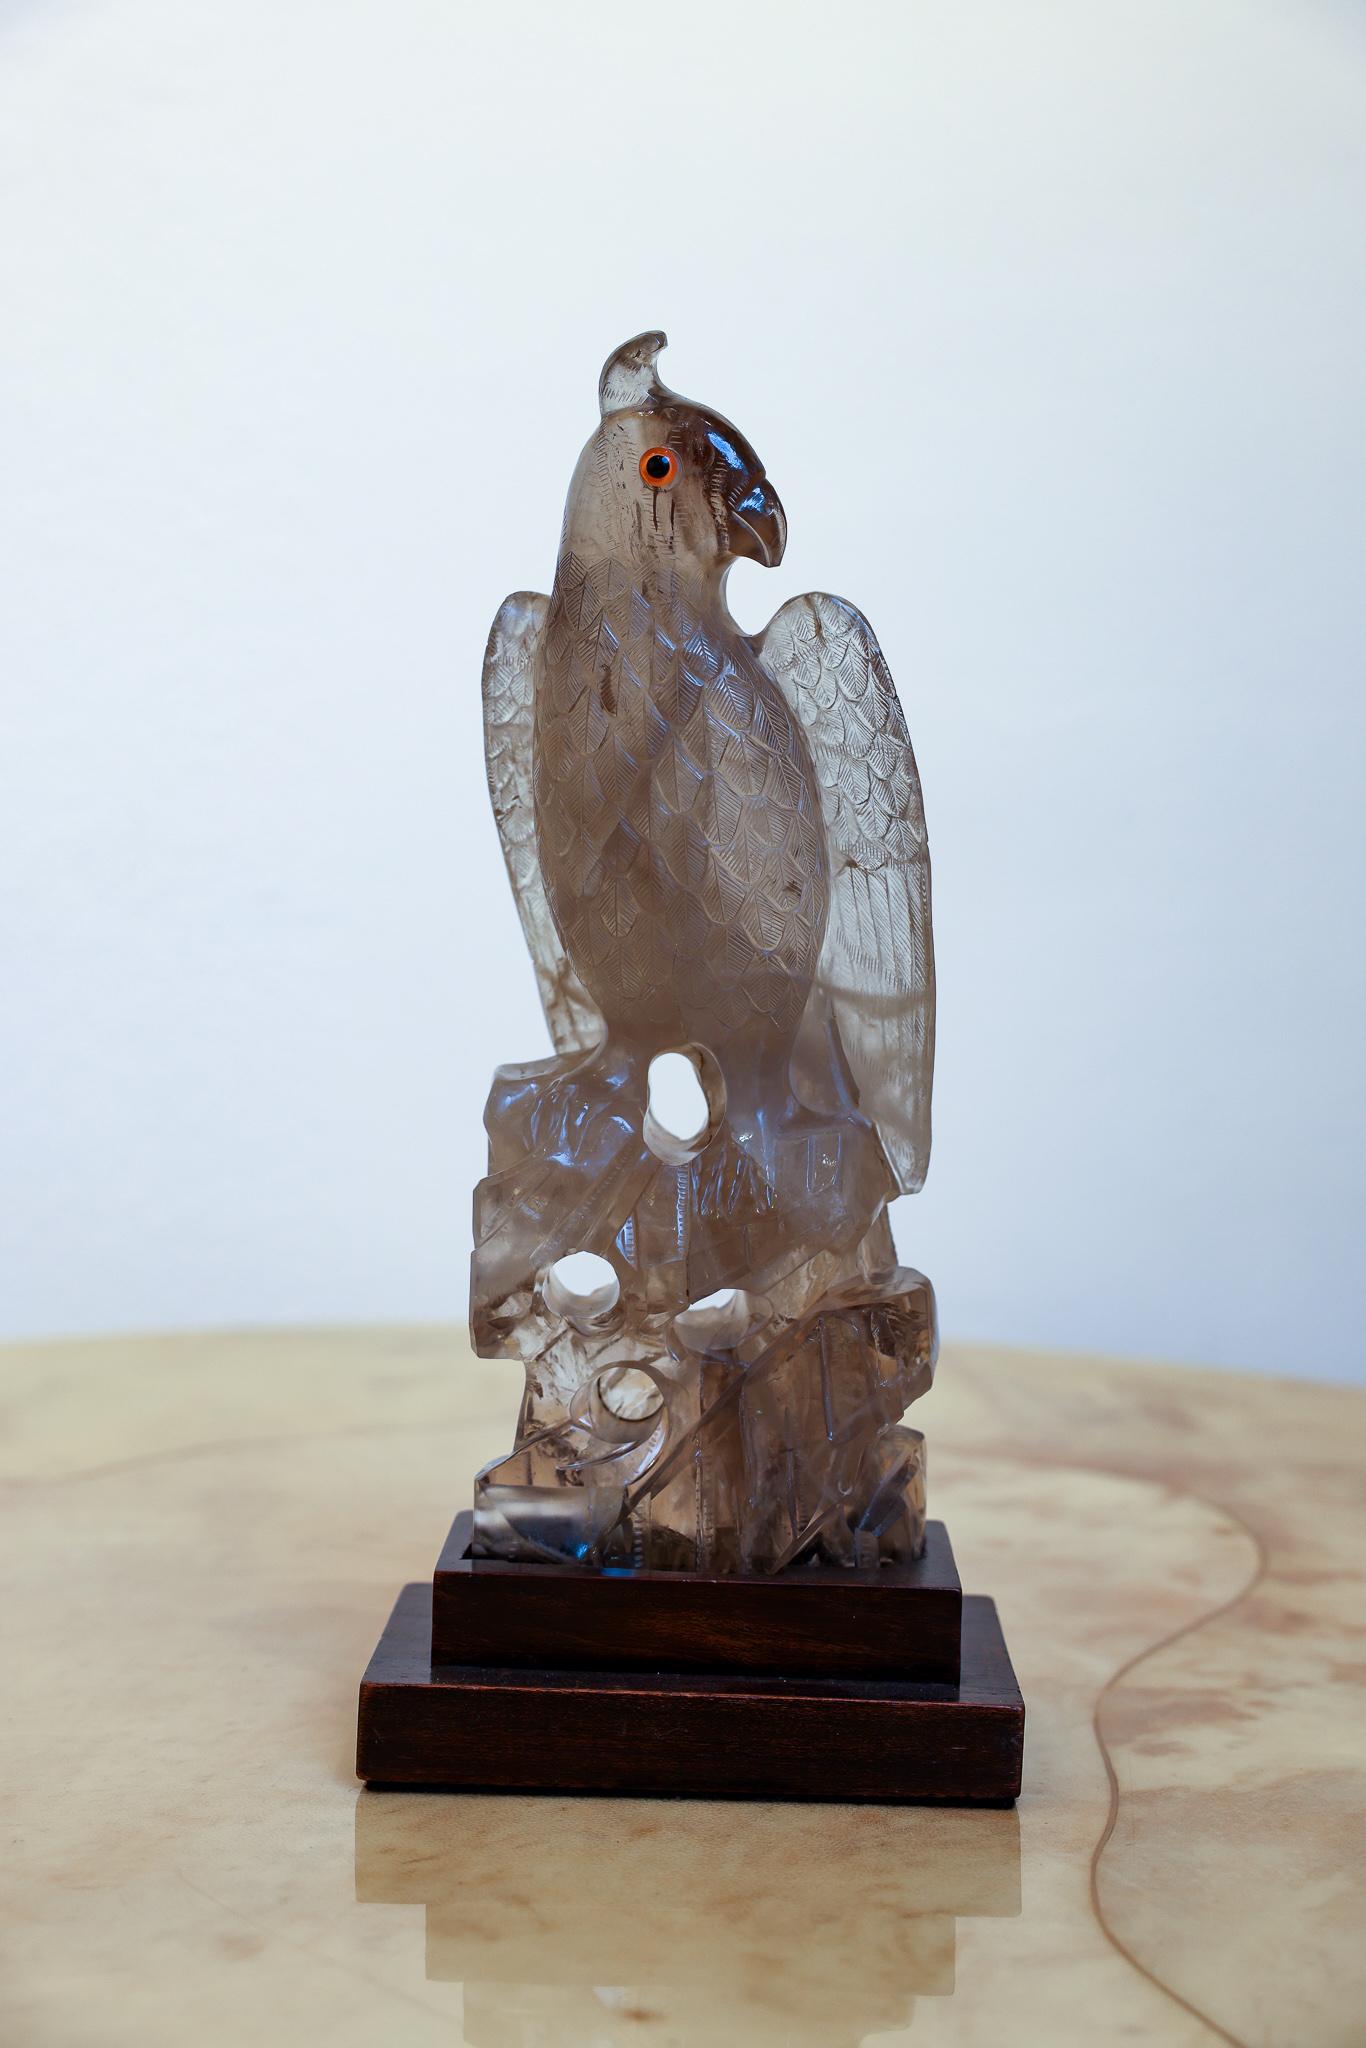 This majestic eagle is hand carved from quality smoky quartz. The eagle is standing on a decorative geometric base that has been custom made for this purpose. With faux glass eyes, the eagle is looking over his left wing. The detail, particularly in